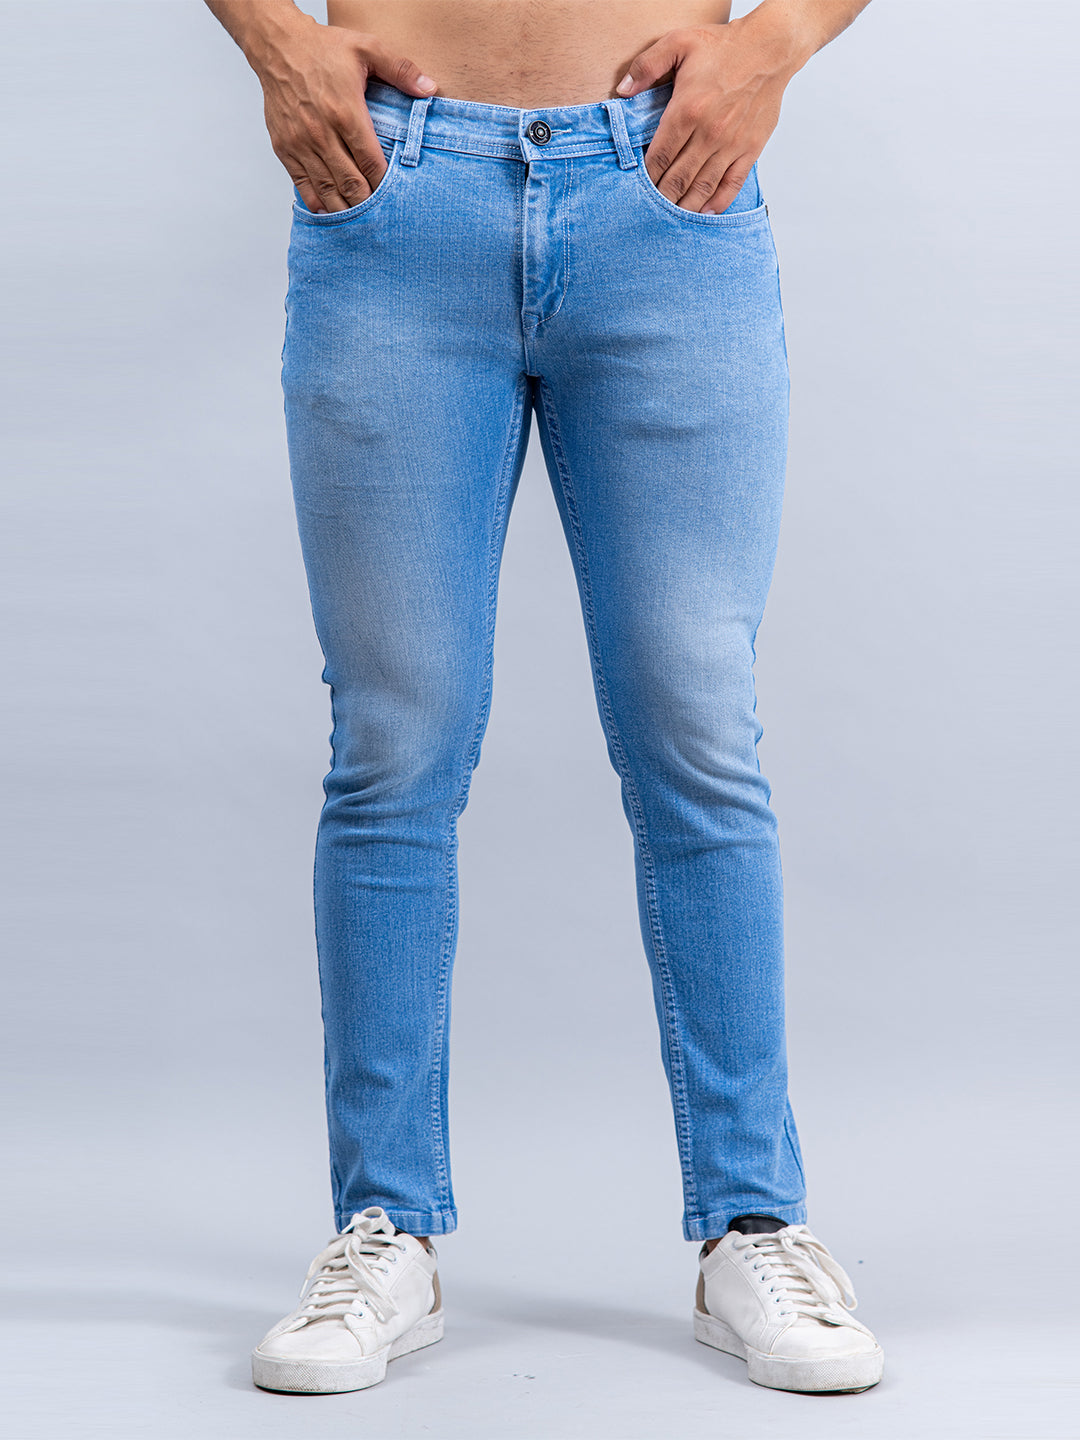 Designer Sky Blue Stretch Skinny Jeans For Men Scratch Proof Pencil Pants  With Elastic Rolling Waistband Jeans Streetwear Style 230721 From Xue01,  $21.33 | DHgate.Com